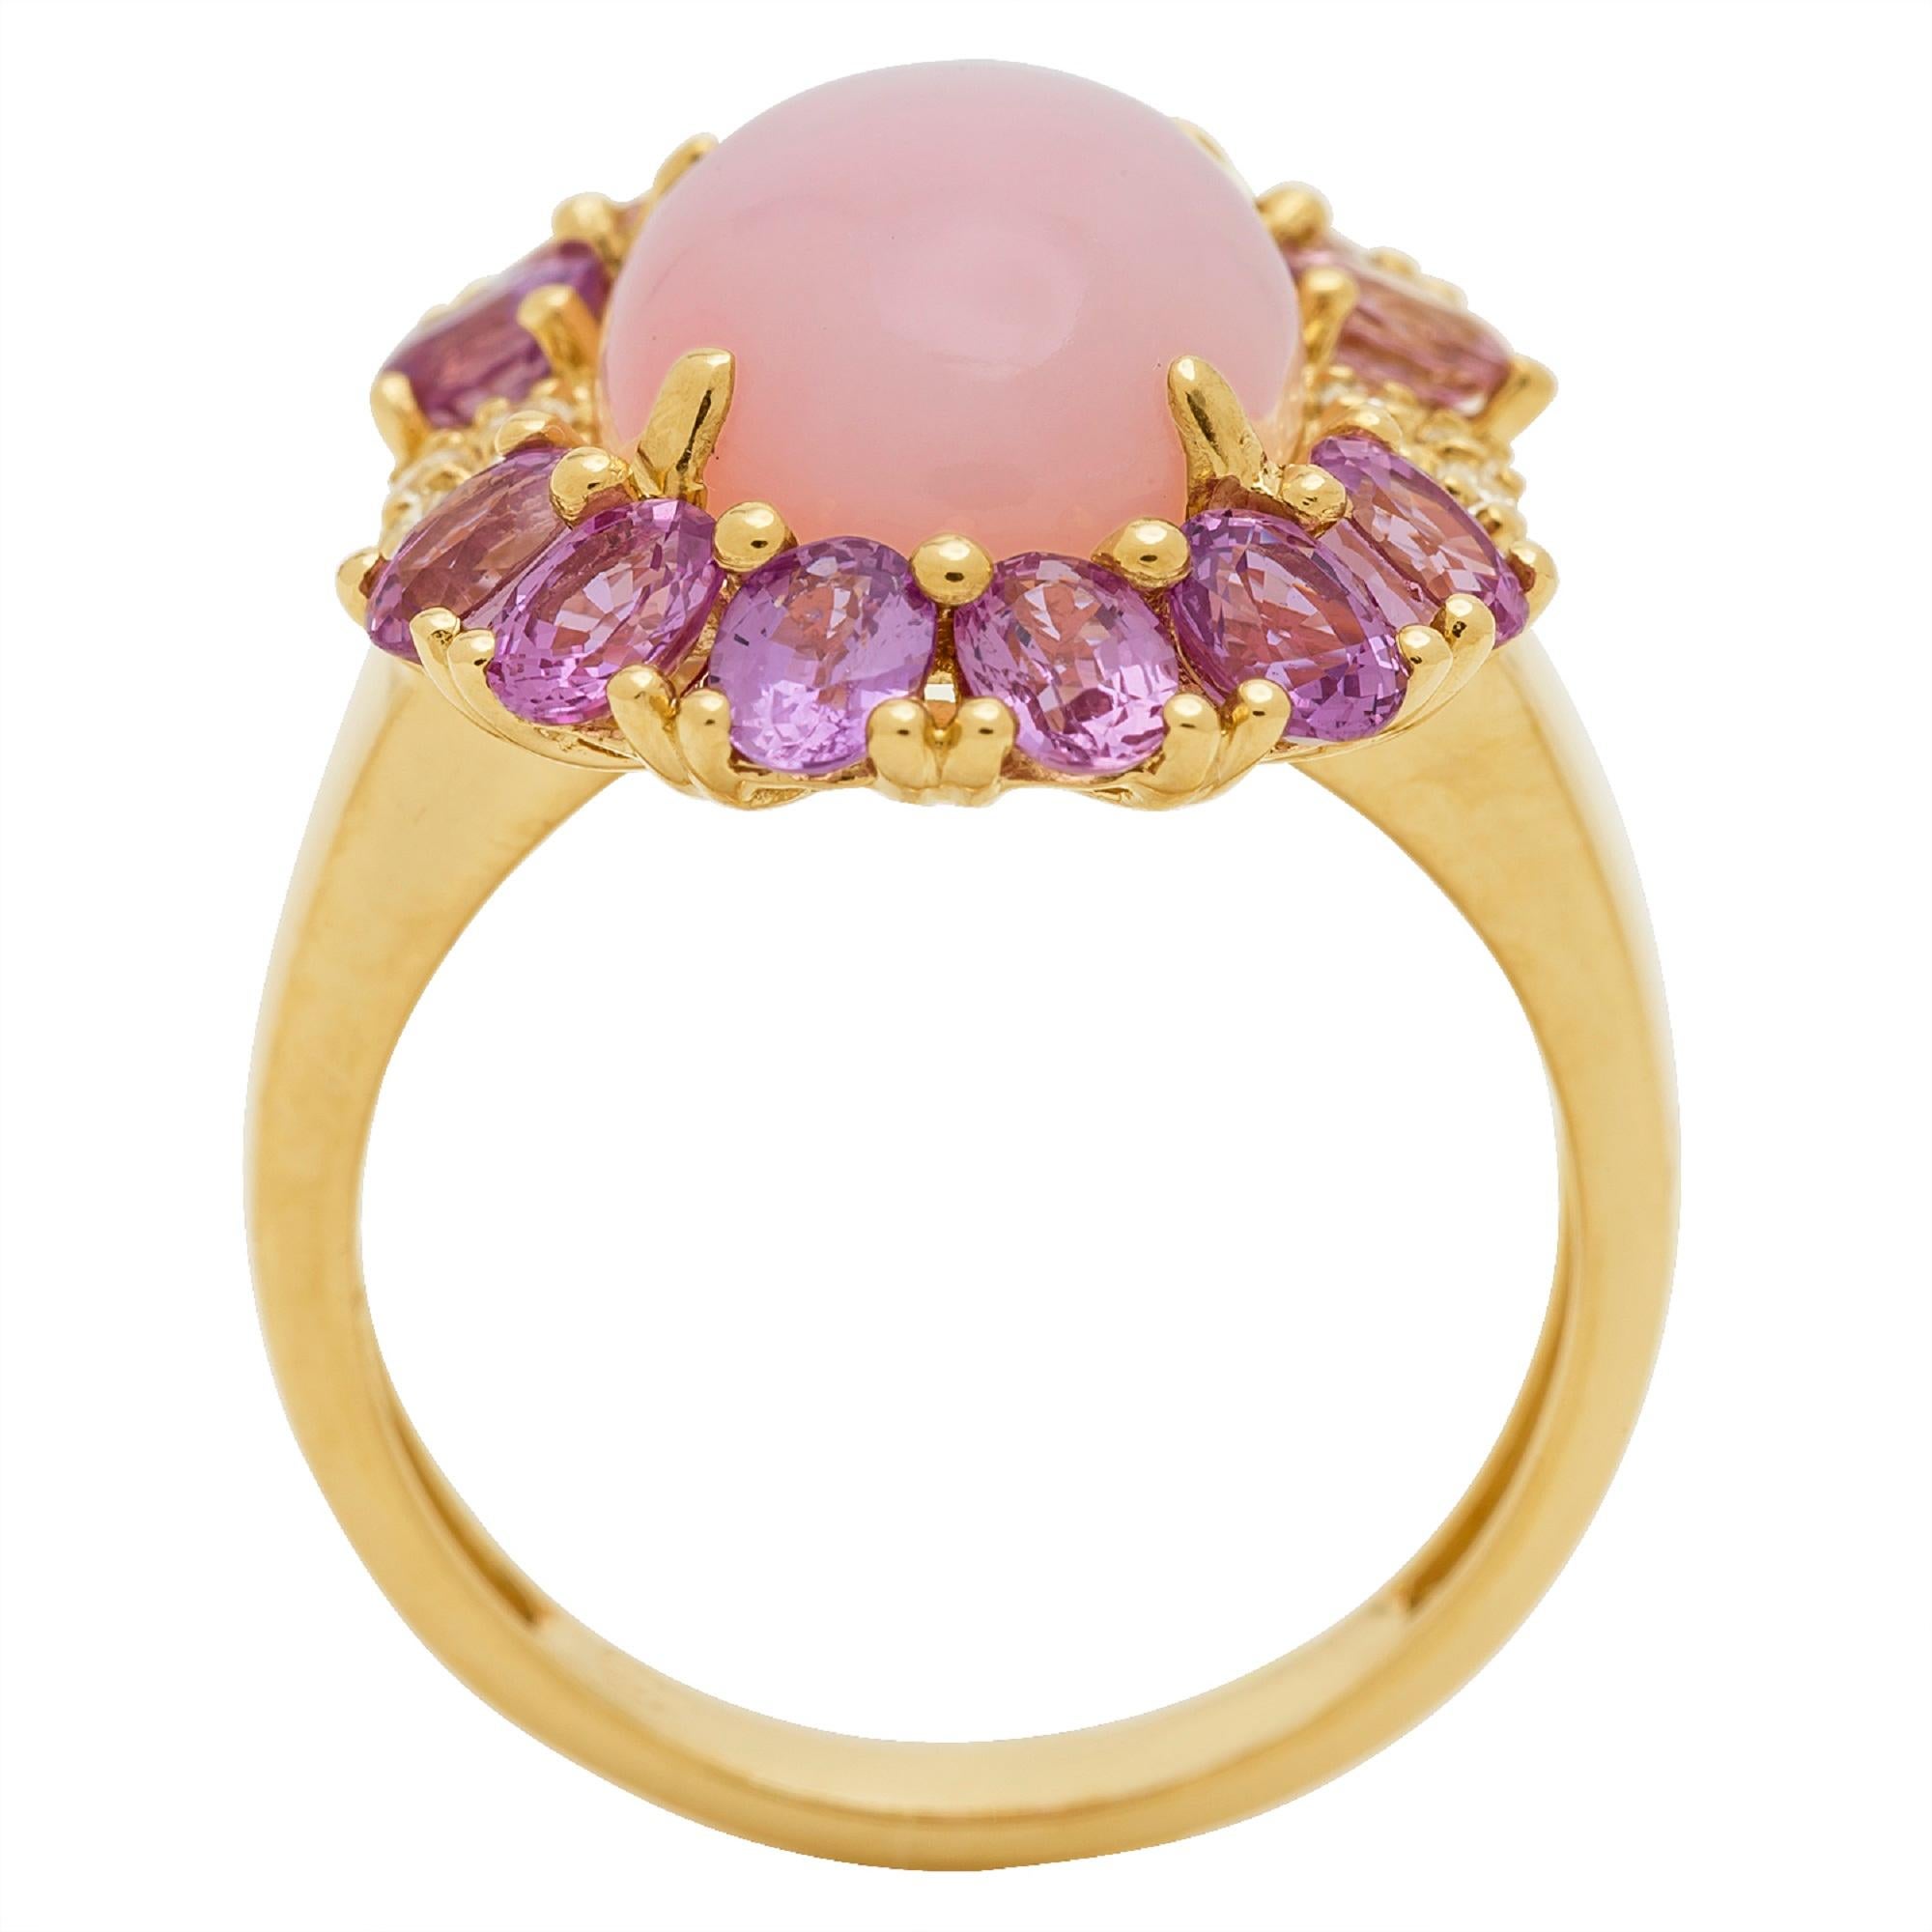 Art Deco Oval Cab Pink Opal, Oval-Cut Pink Sapphire Diamond Accents 14K Yellow Gold Ring